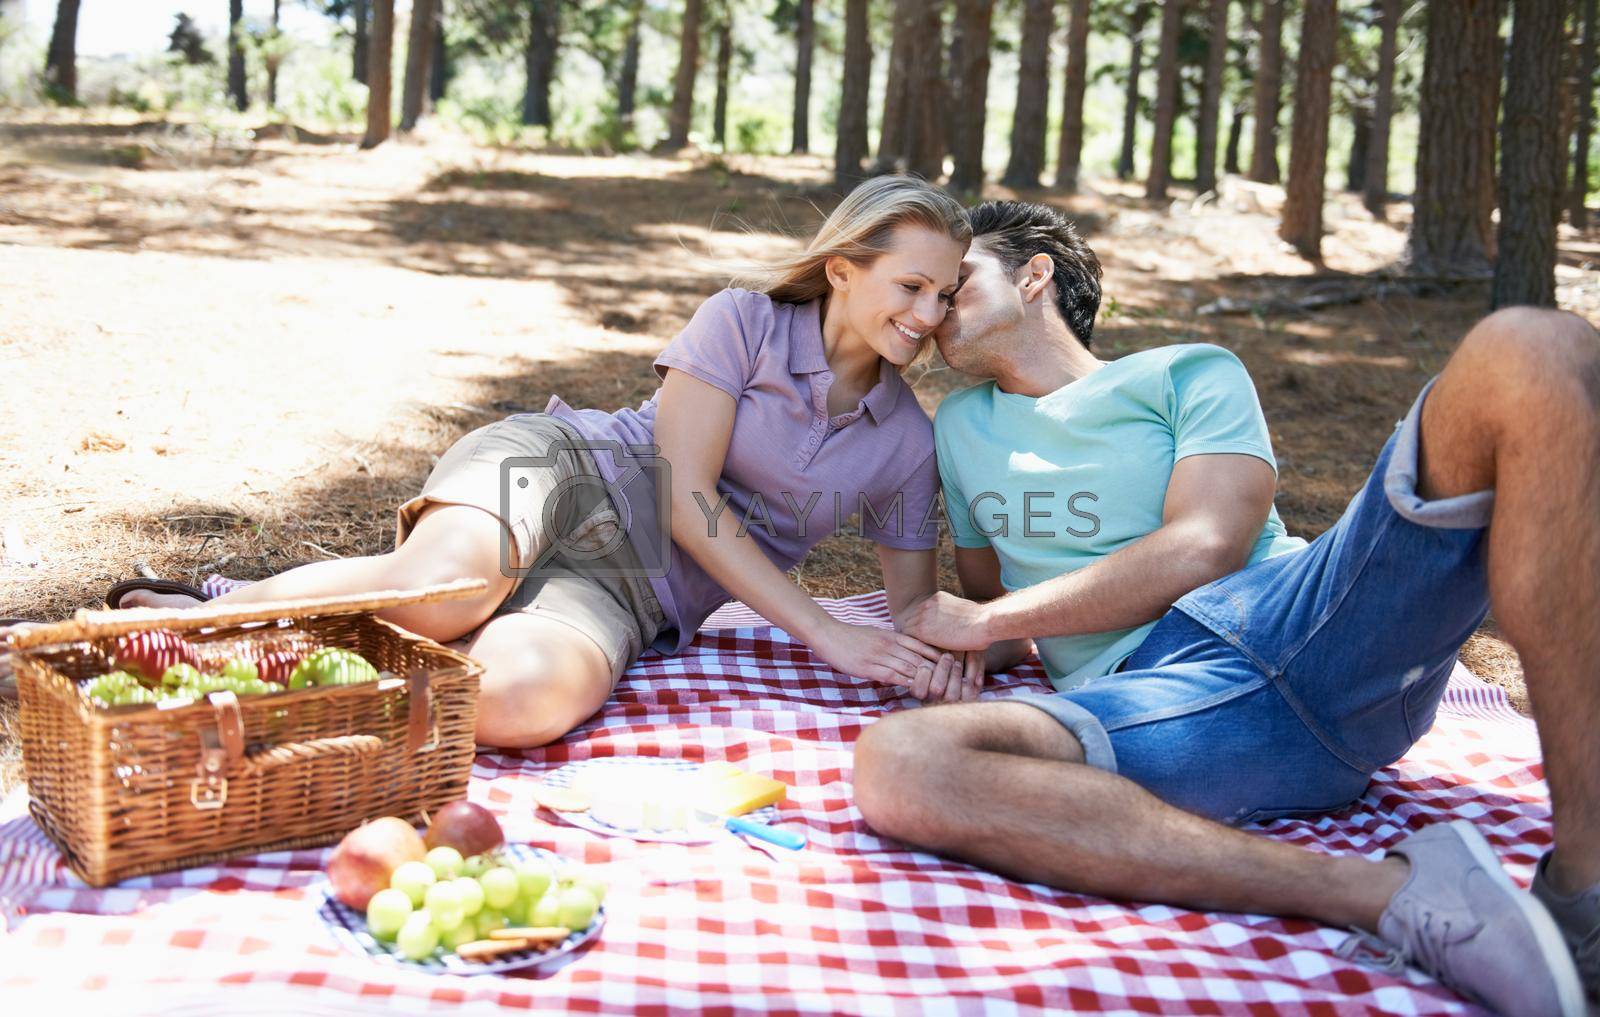 Royalty free image of Basking in the romance. A happy young couple showing each other affection while having a picnic in the forest. by YuriArcurs